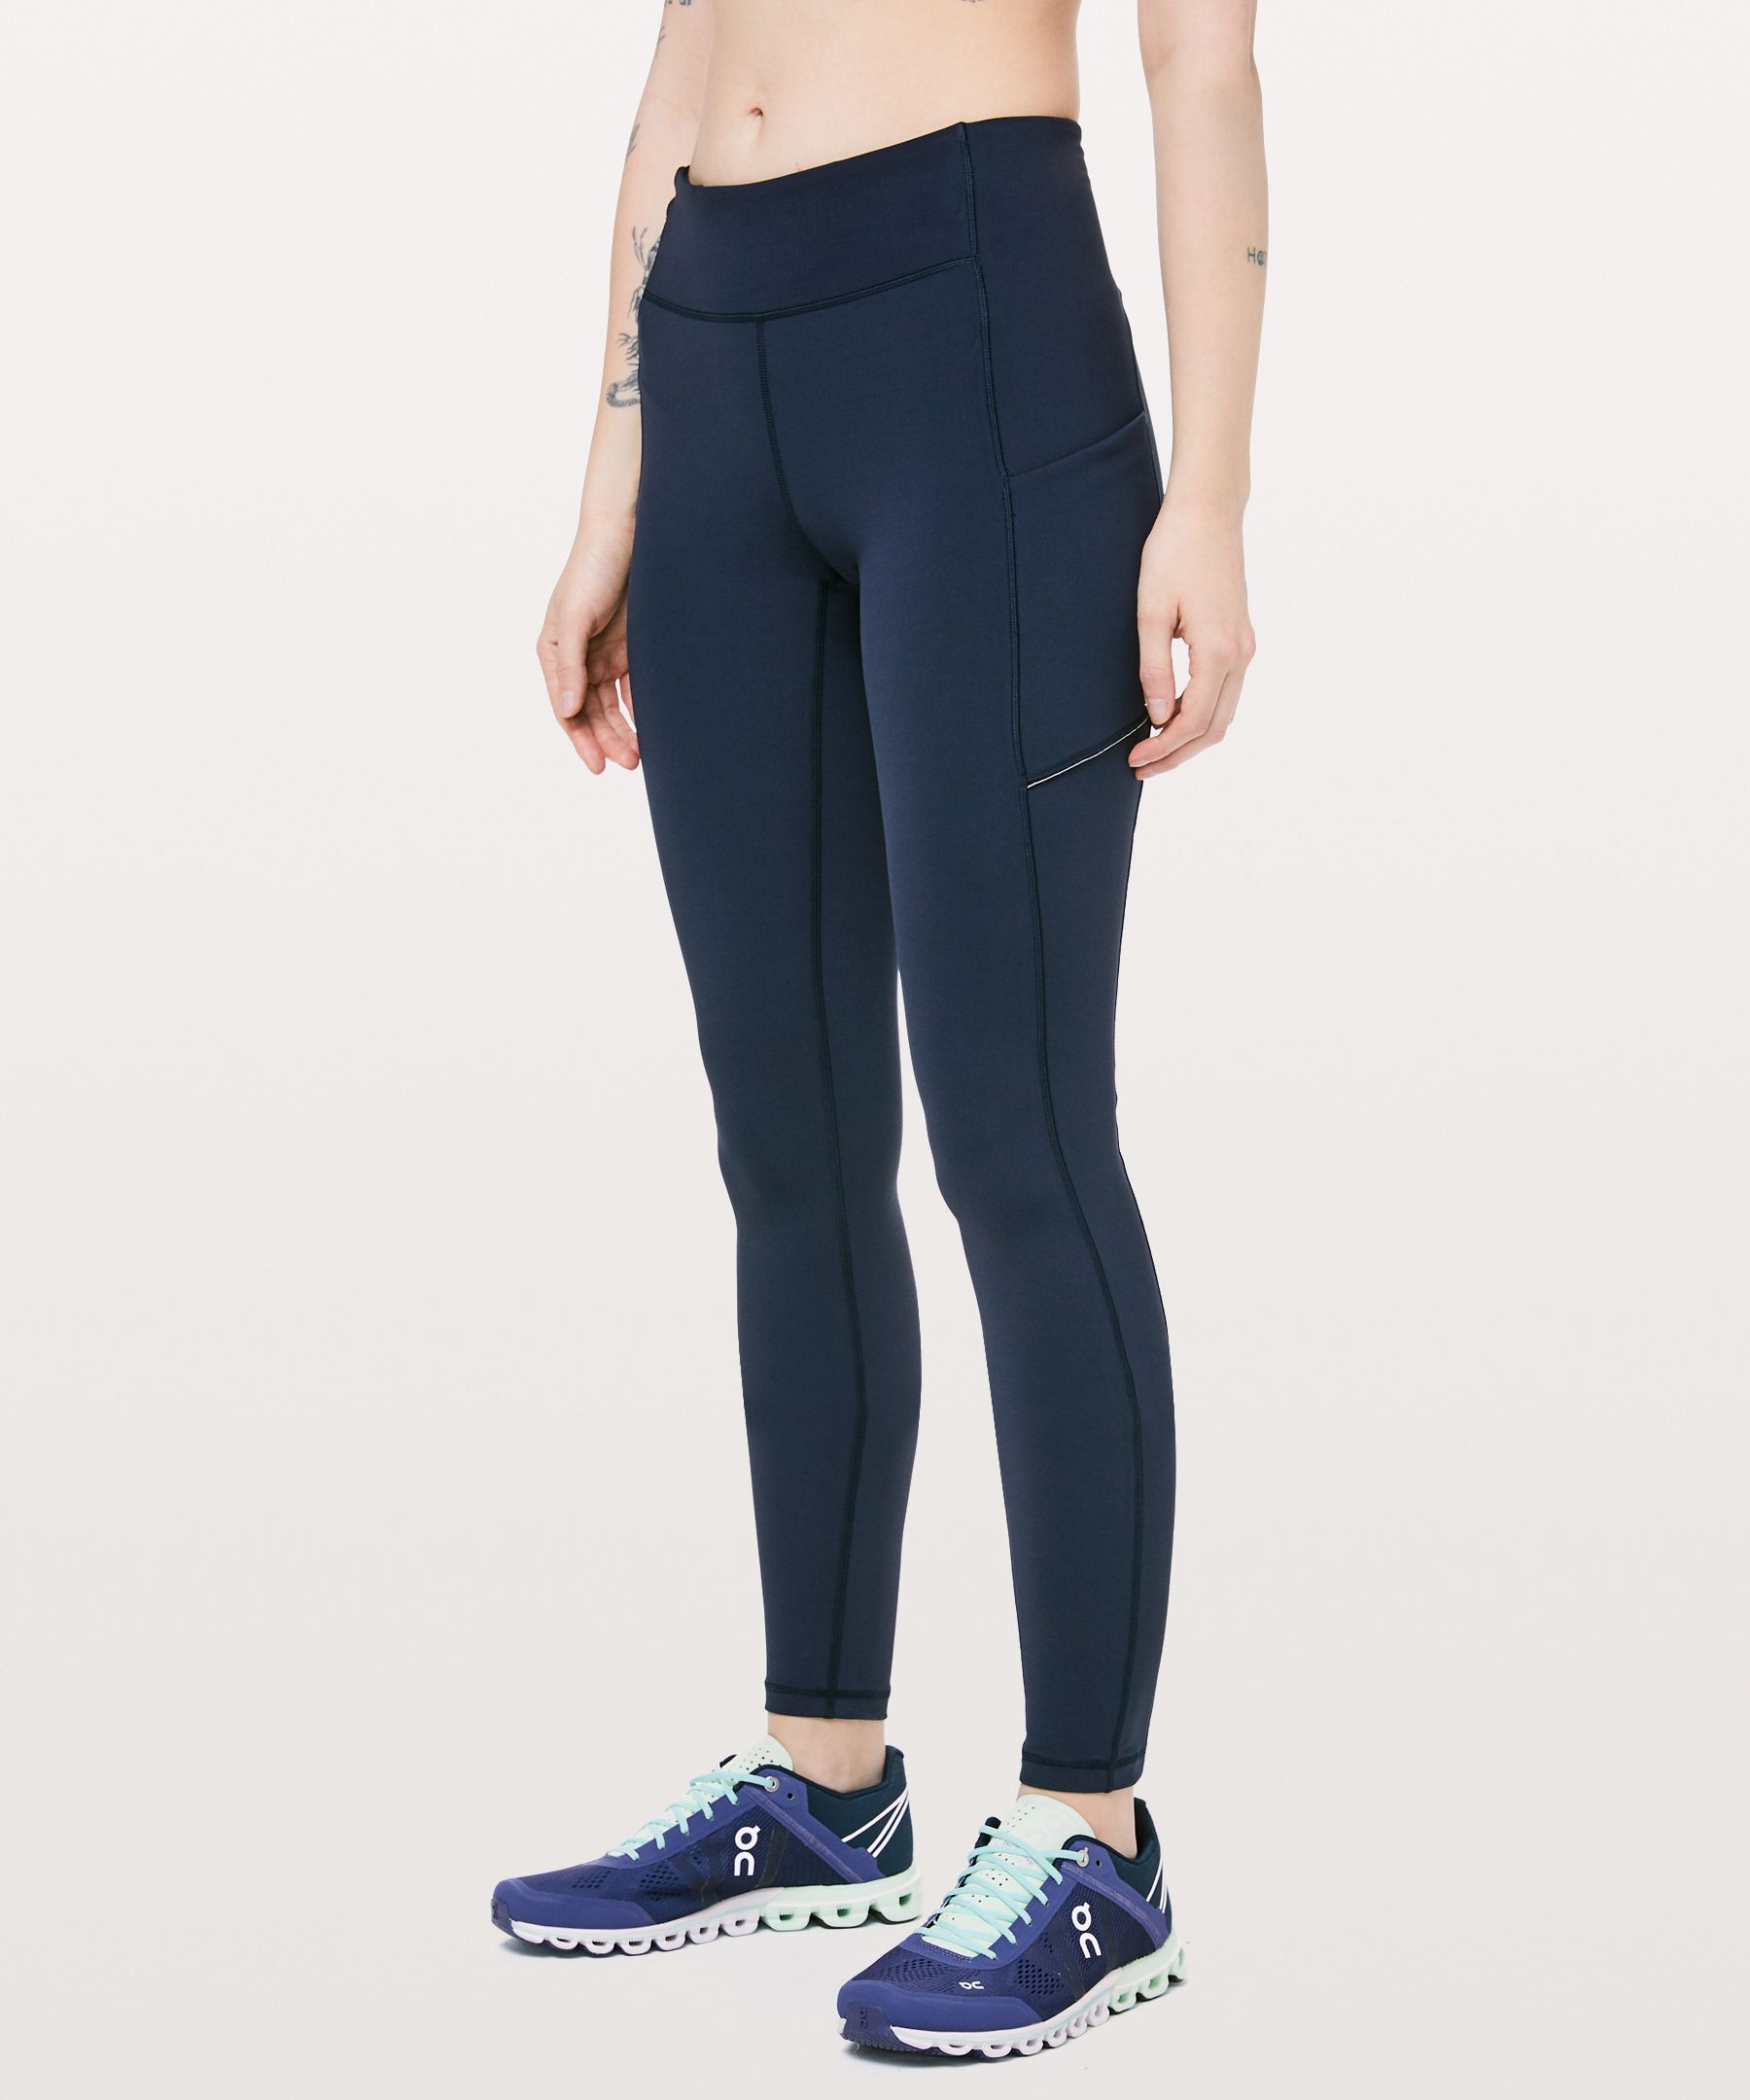 Lululemon Fast And Free Reflective High-rise Tights 31" In True Navy